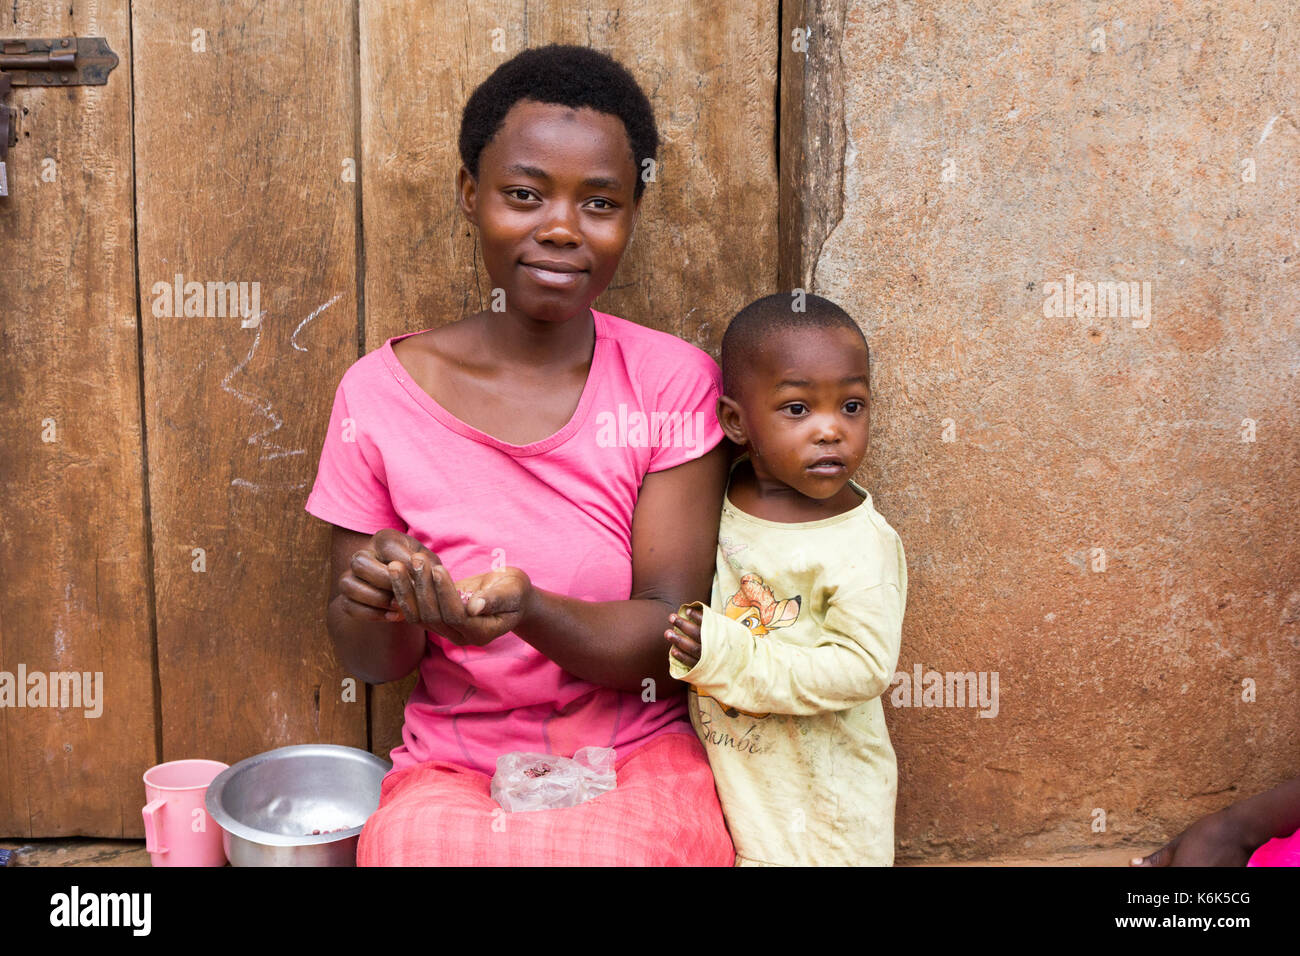 Lugazi, Uganda. 09 June 2017. A laughing African mother with a little child boy. The woman is sitting on door threshold sorting grains. Stock Photo